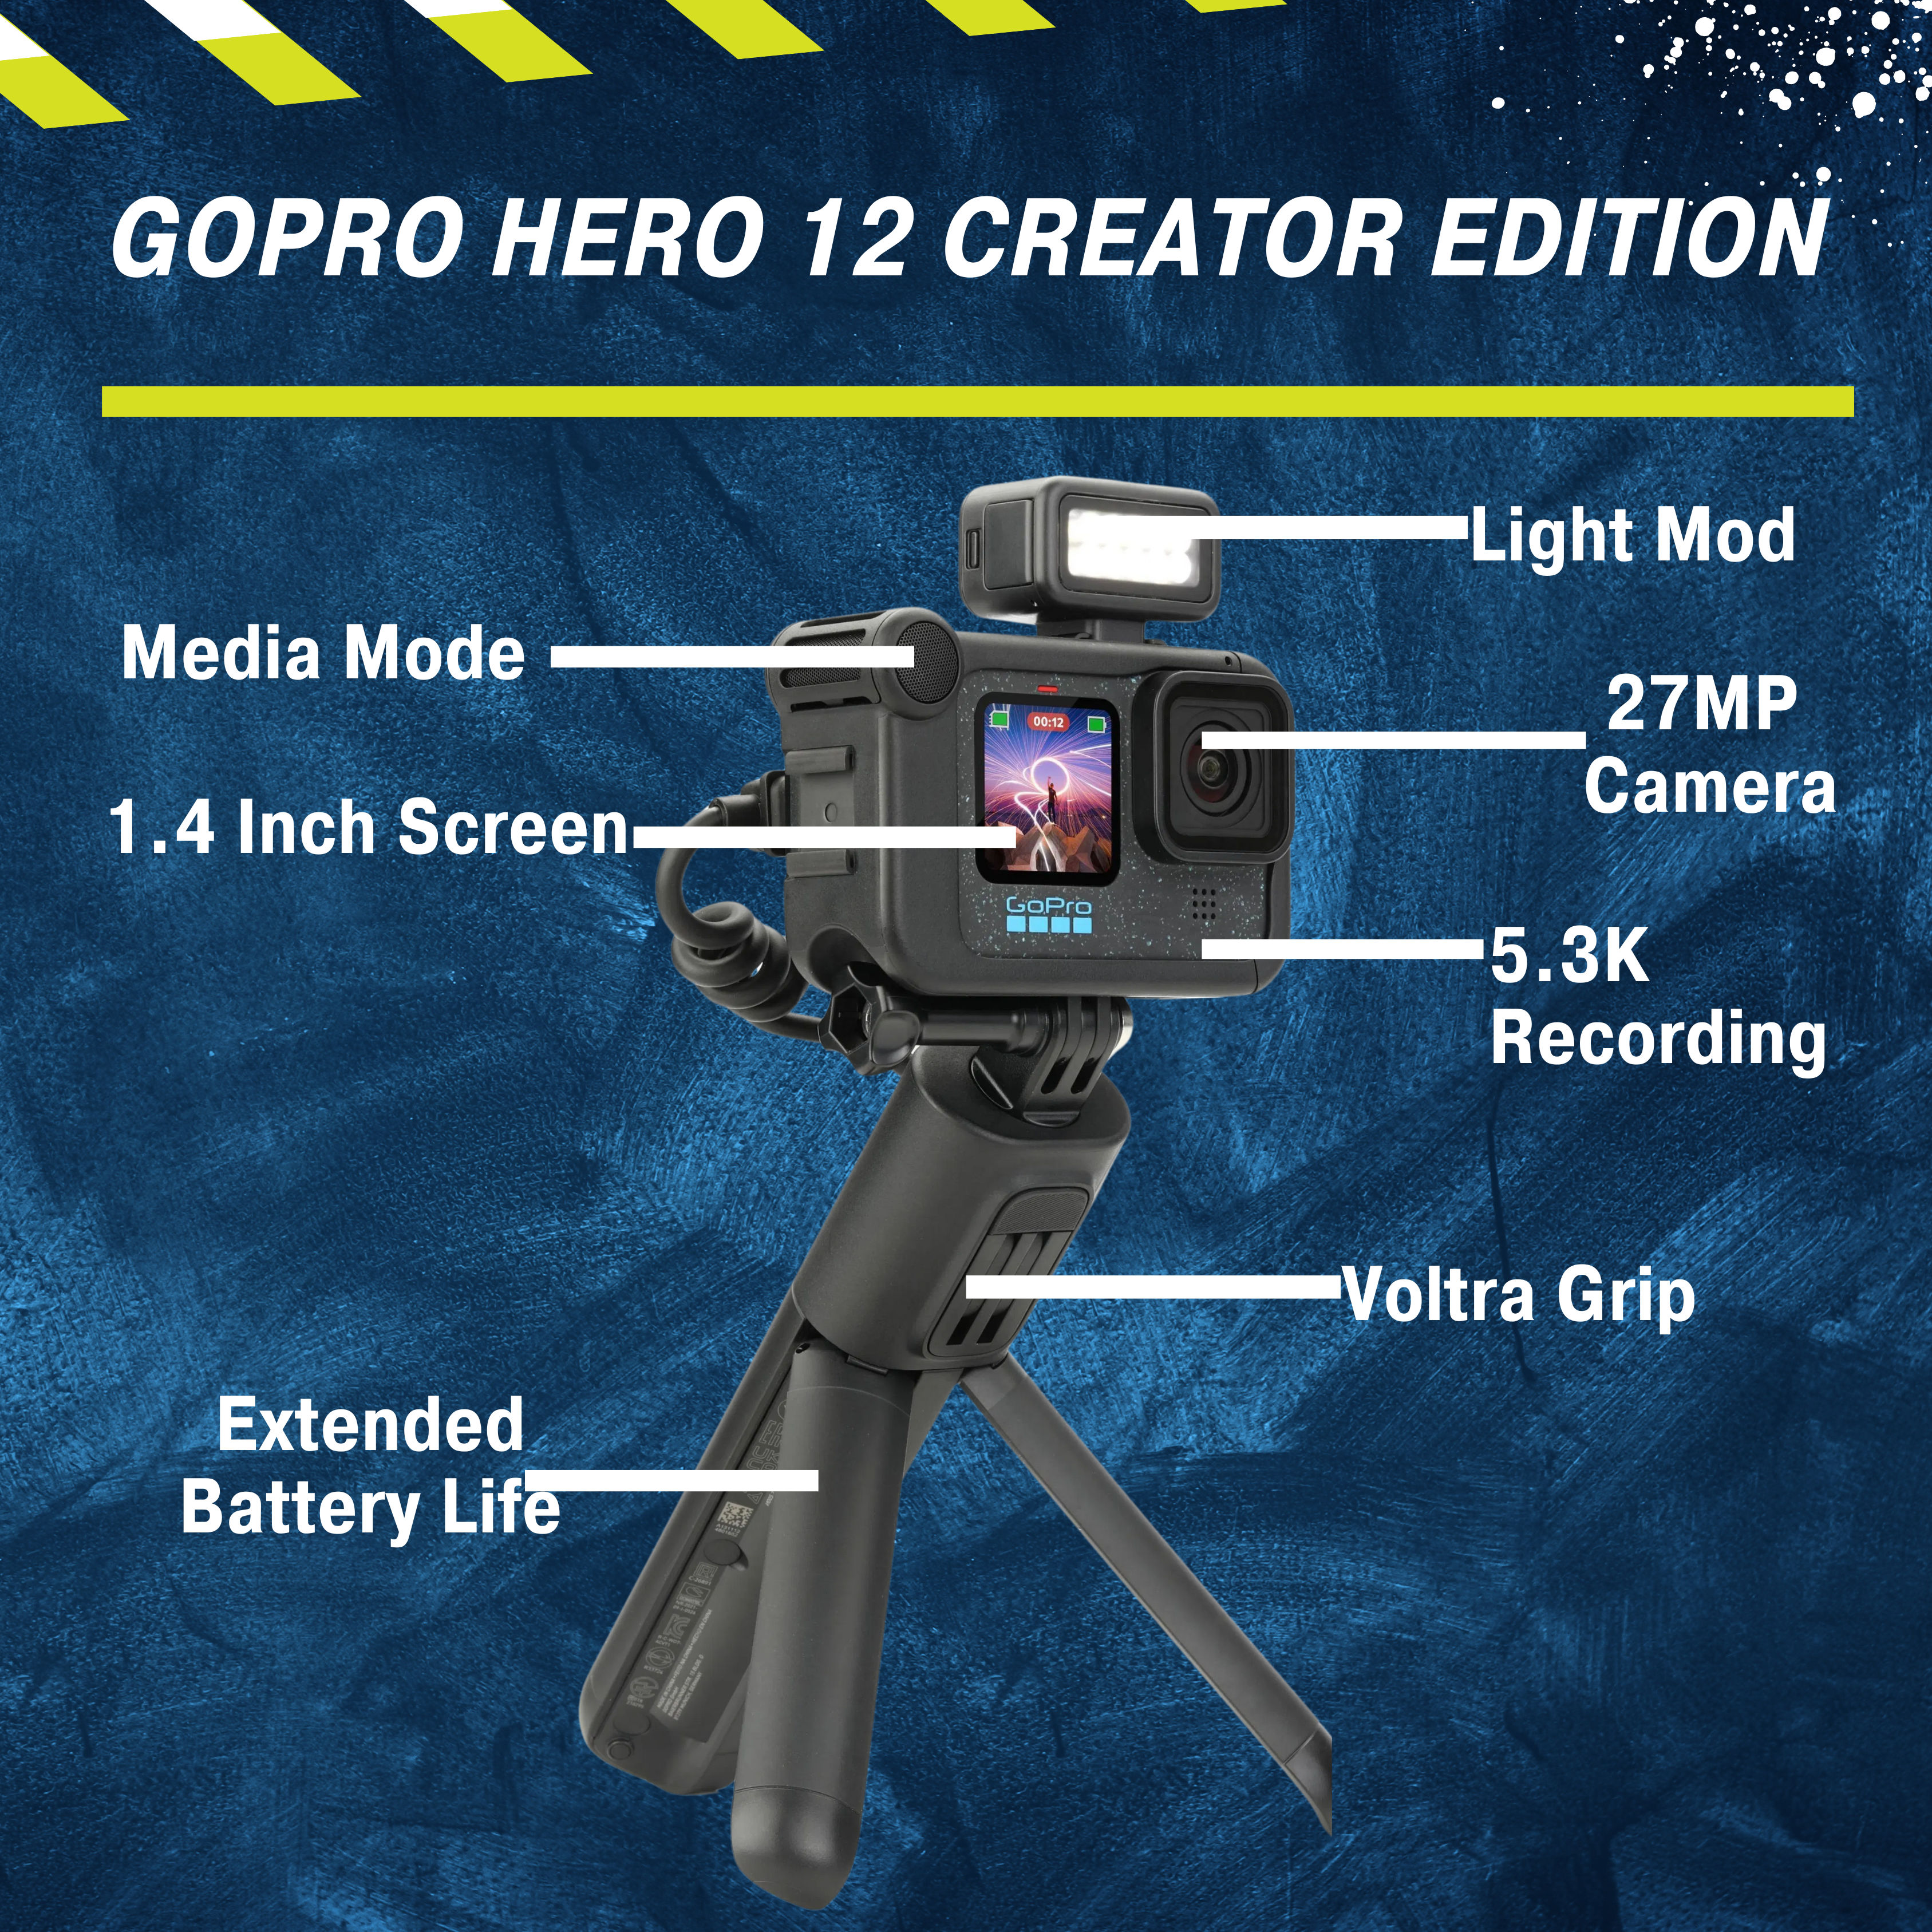 This is an image of Hero 12 Creator Edition on rent offerred by SharePal.in